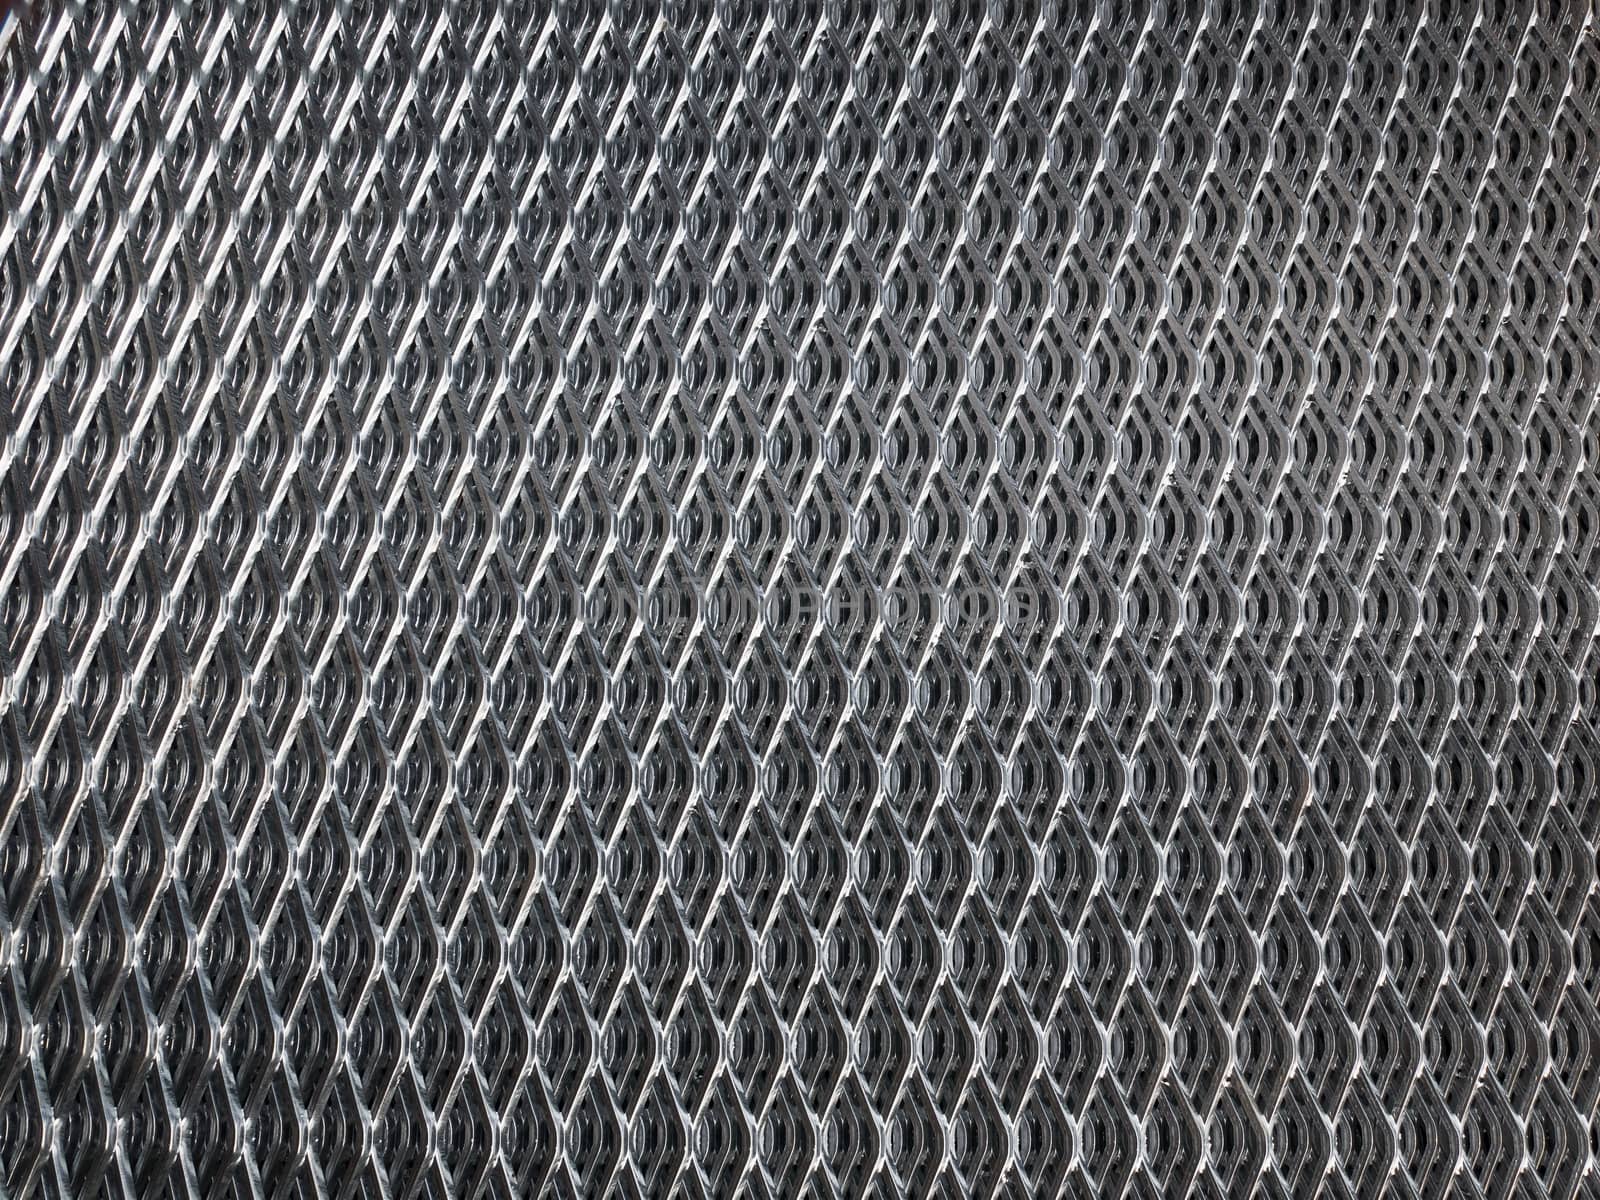 Shiny, galvanised industrial steel grid for use as background.